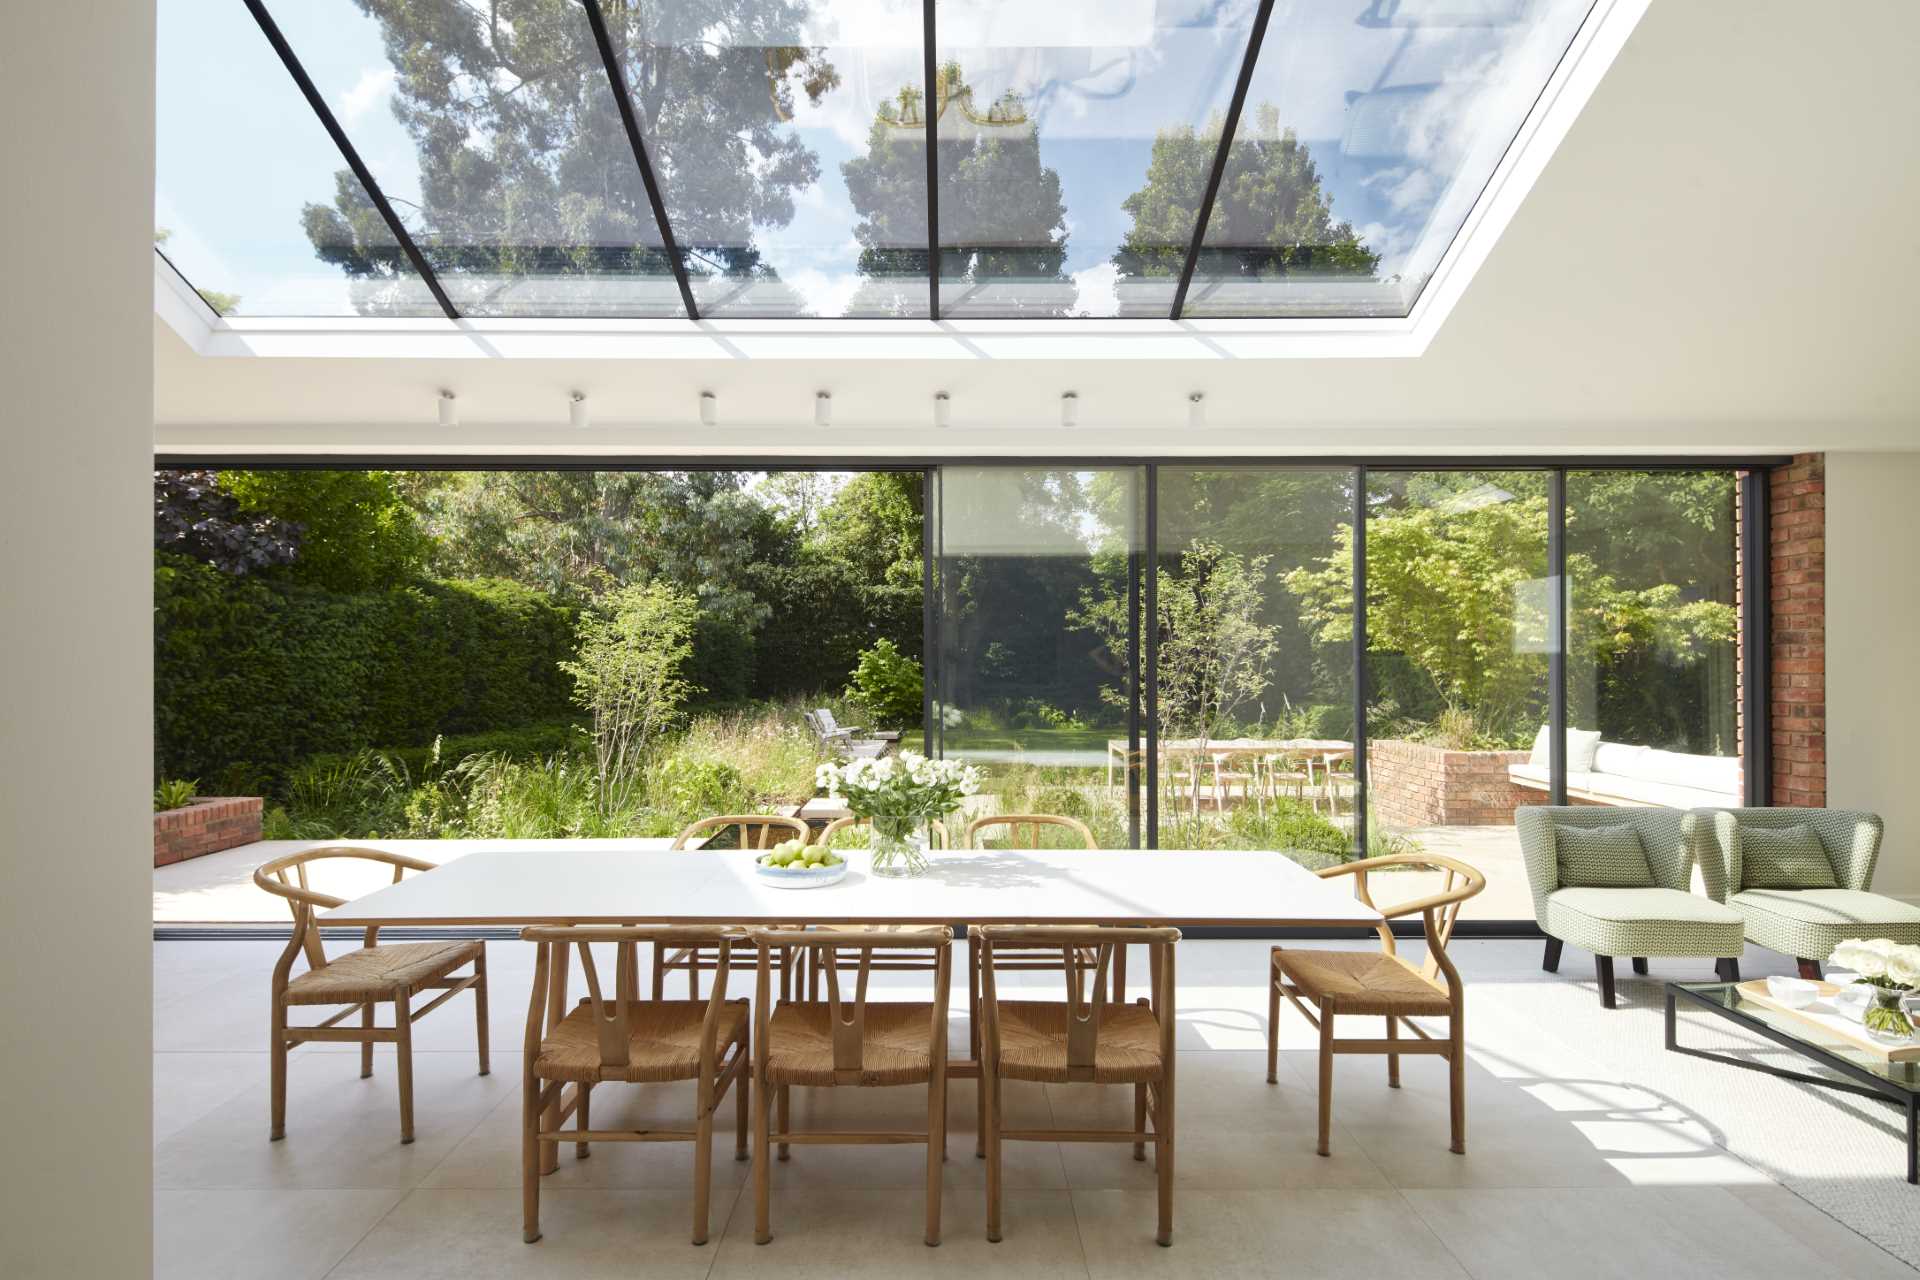 A casual living room with built-in cabinets and shelving, has a view of the light-filled addition and the garden beyond.